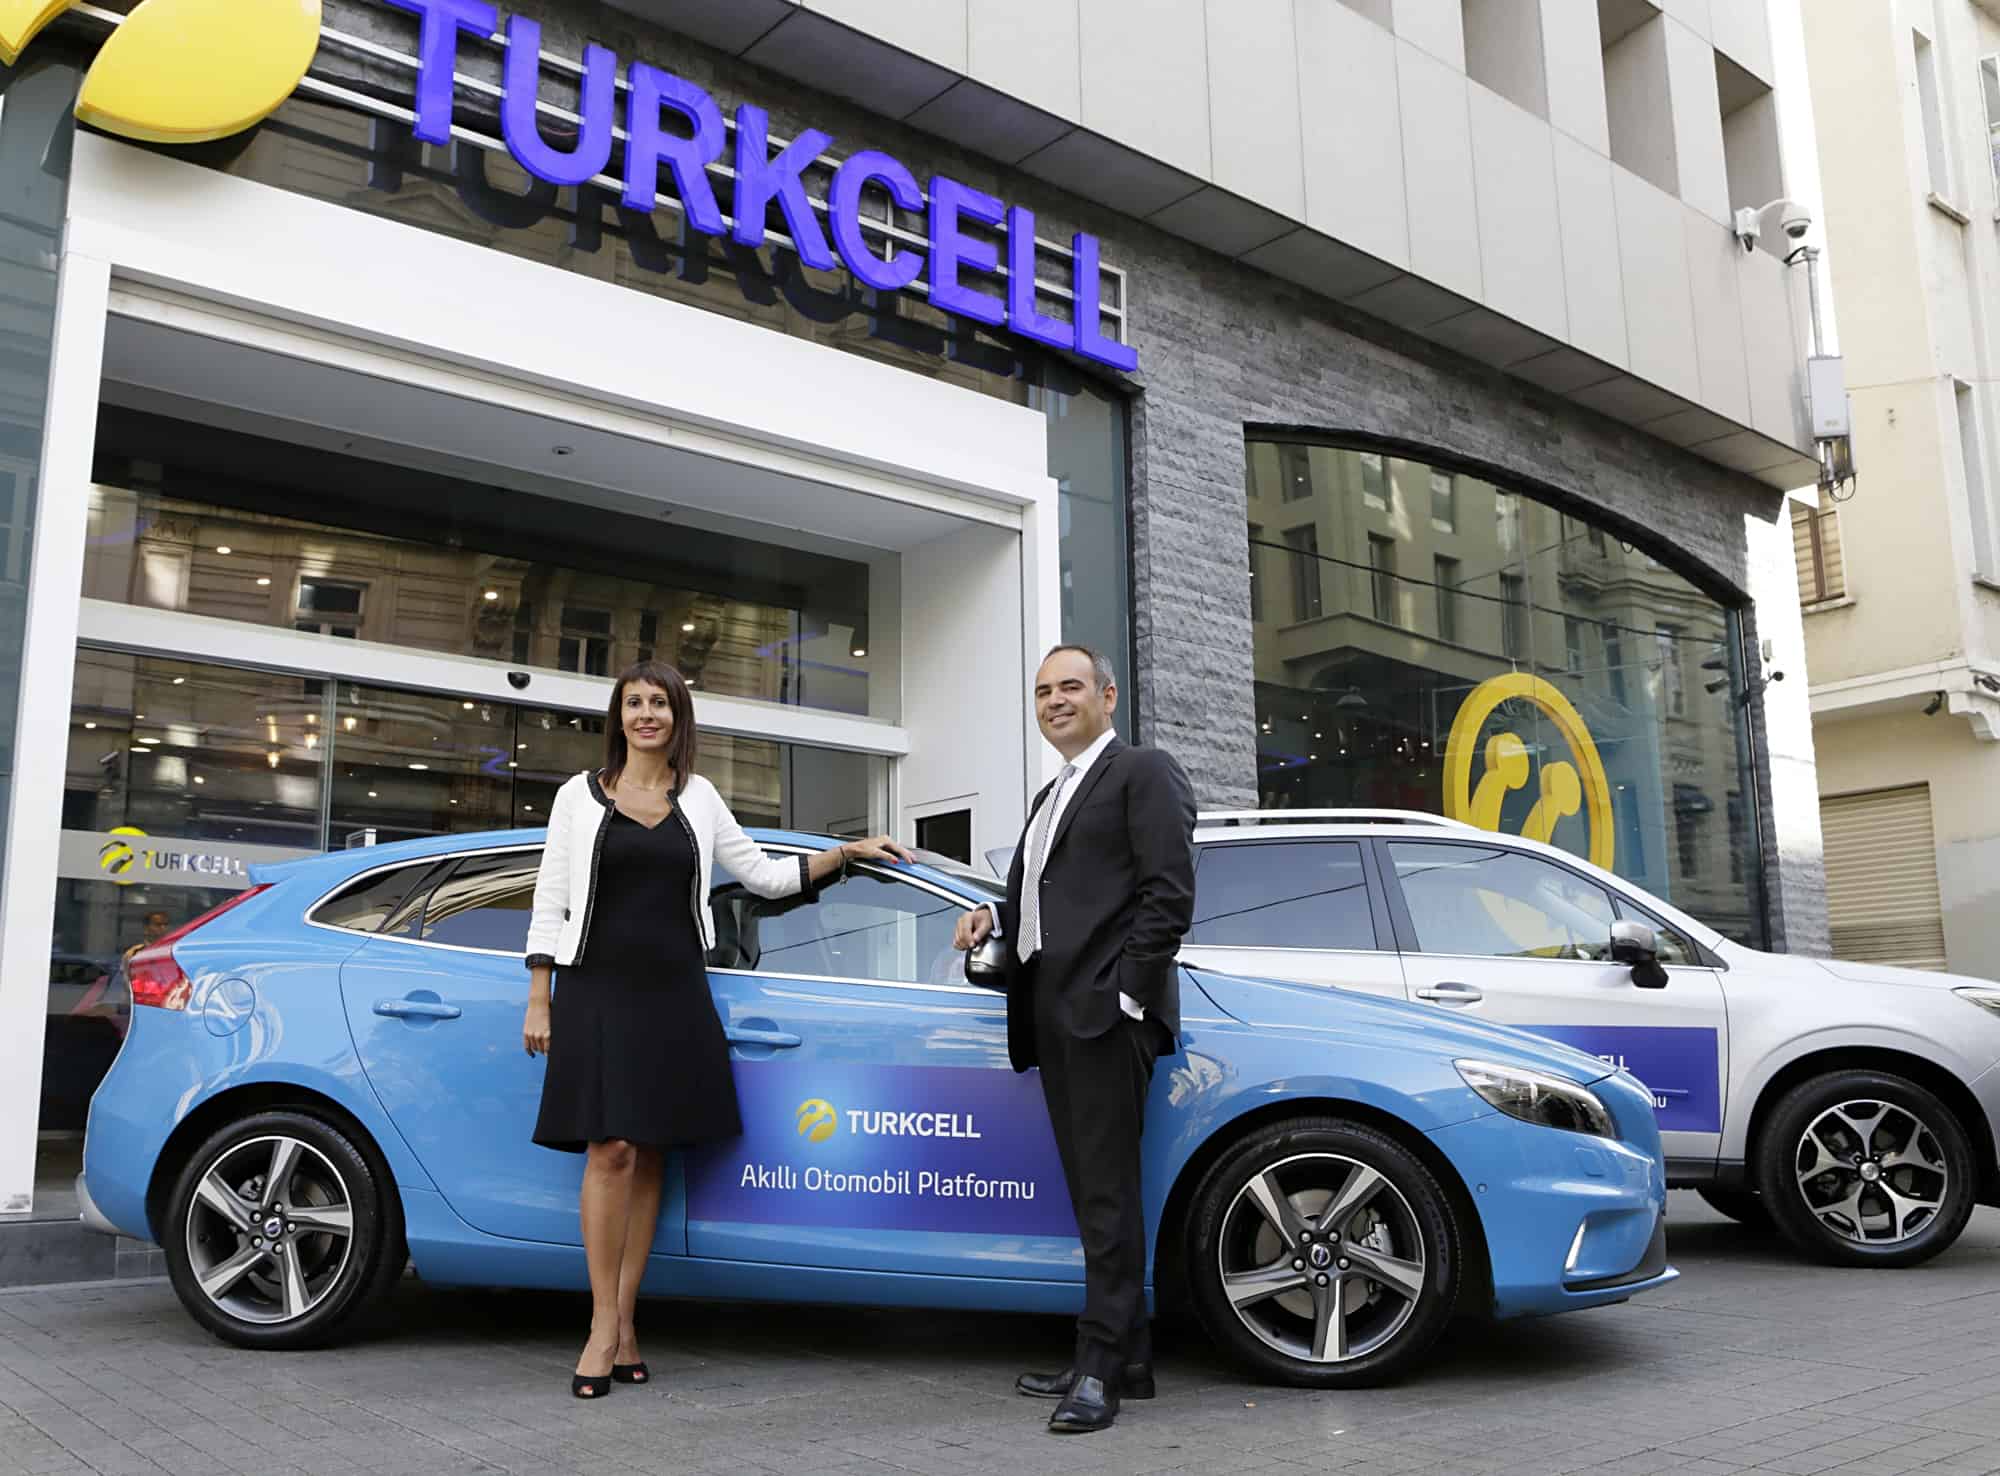 Turkcell&#039;s Chief Corporate Business Officer Selen Kocabas and Chief Corporate Marketing Officer Yigit Kulabas introduced Turkcell&#039;s Connected Car Platform with a press conference at Turkcell Headquarters in Istanbul